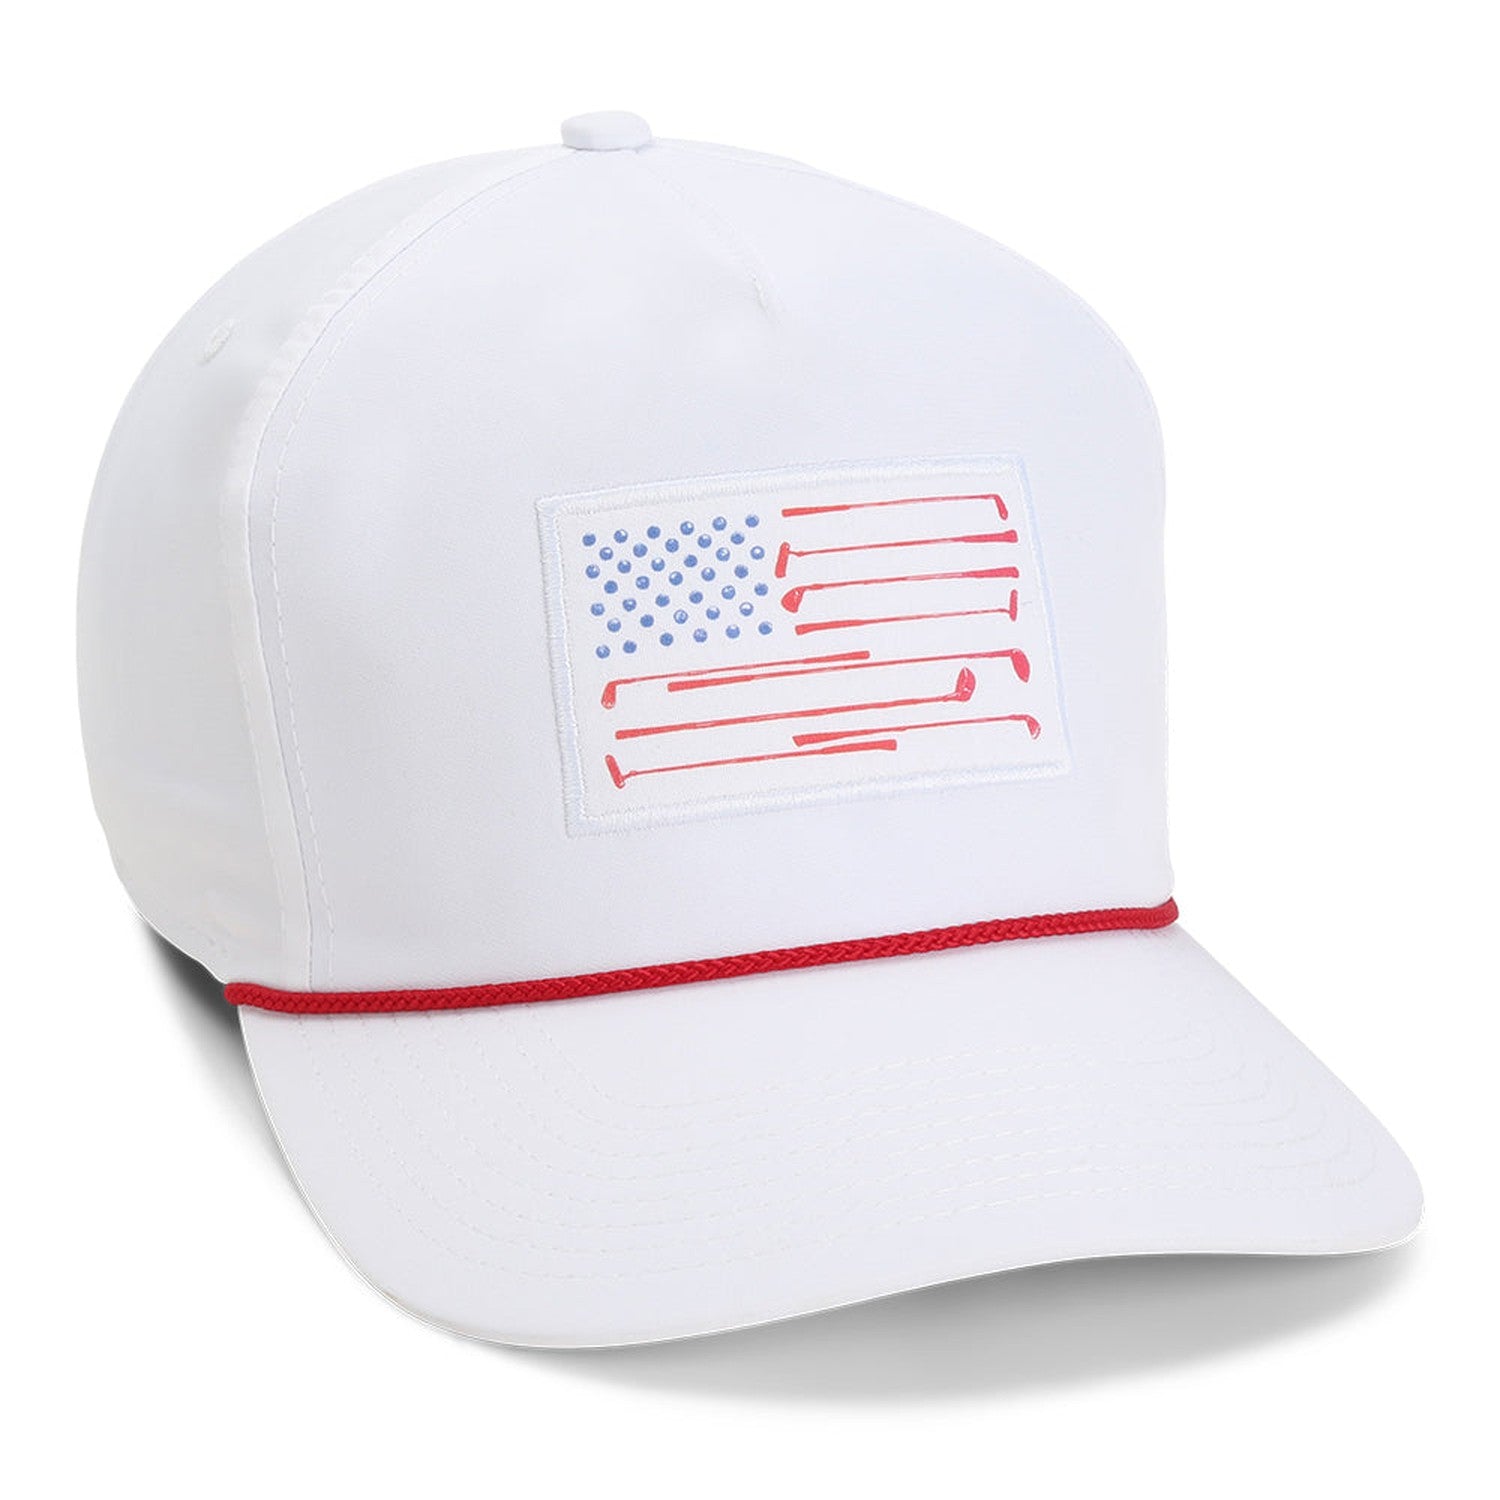 Barstool Golf x Imperial Flag Patch Hat